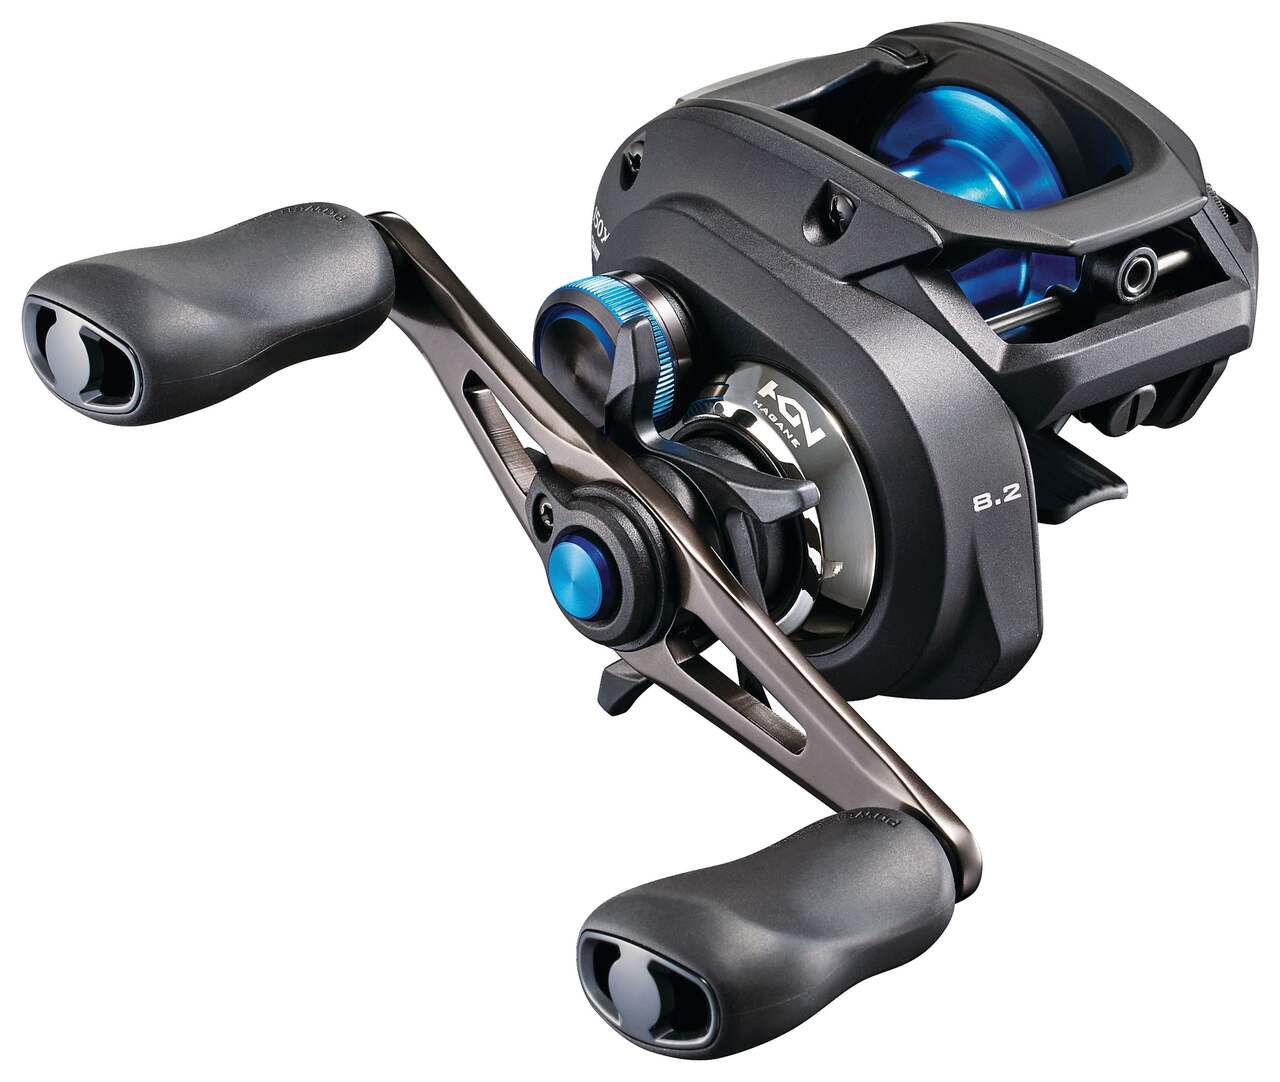 https://media-www.canadiantire.ca/product/playing/fishing/fishing-equipment/1784964/shimano-slx-dc-casting-reel-150-right-hand-040f28b3-0b21-41d5-8fde-99064e76d3f0-jpgrendition.jpg?imdensity=1&imwidth=640&impolicy=mZoom